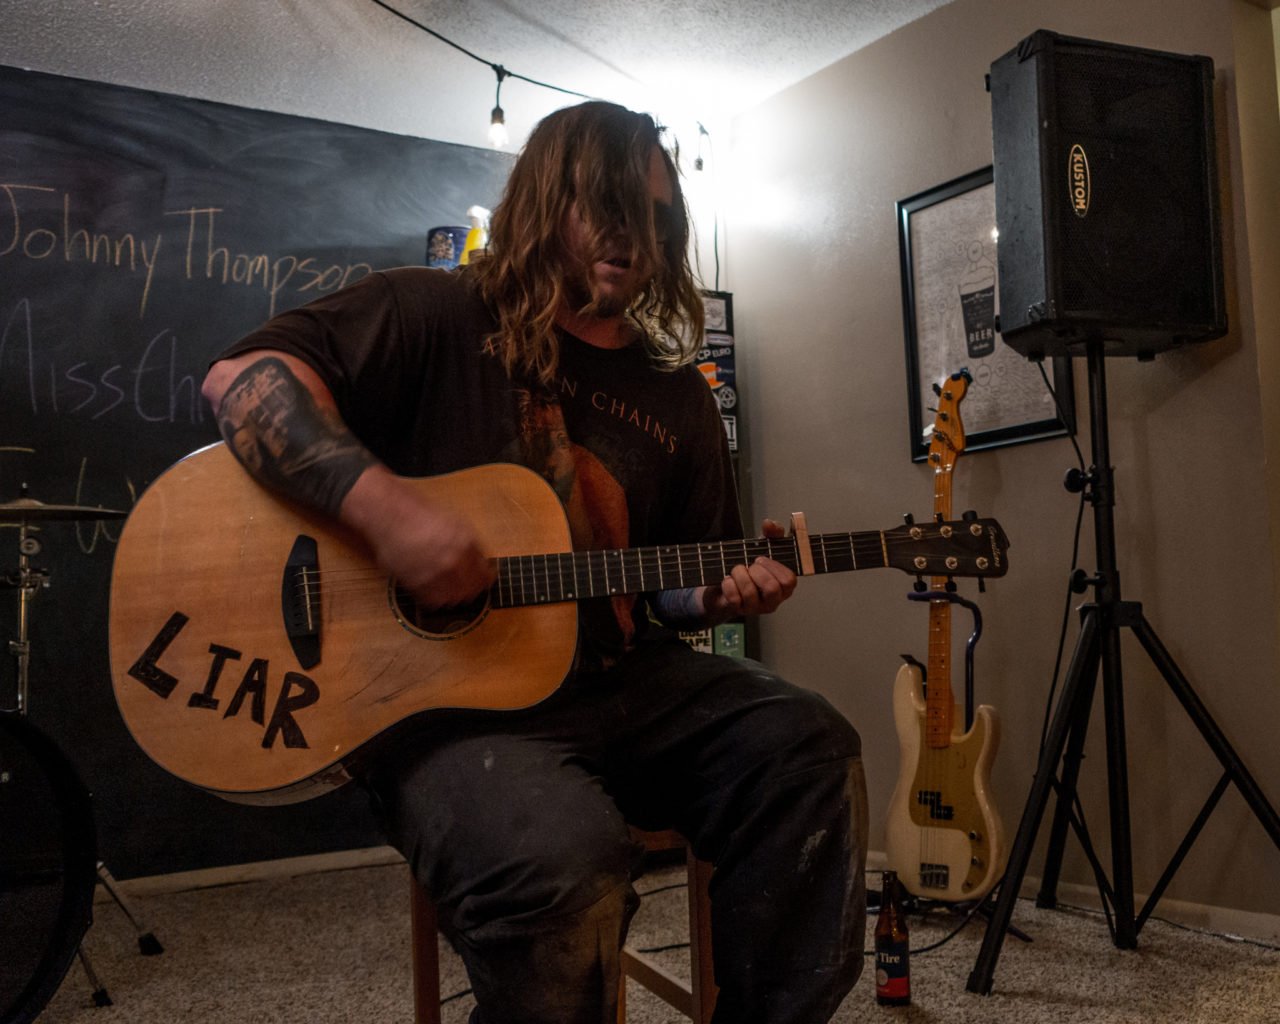 Johnny Thompson playing at our house show in Cedar Rapids, Iowa